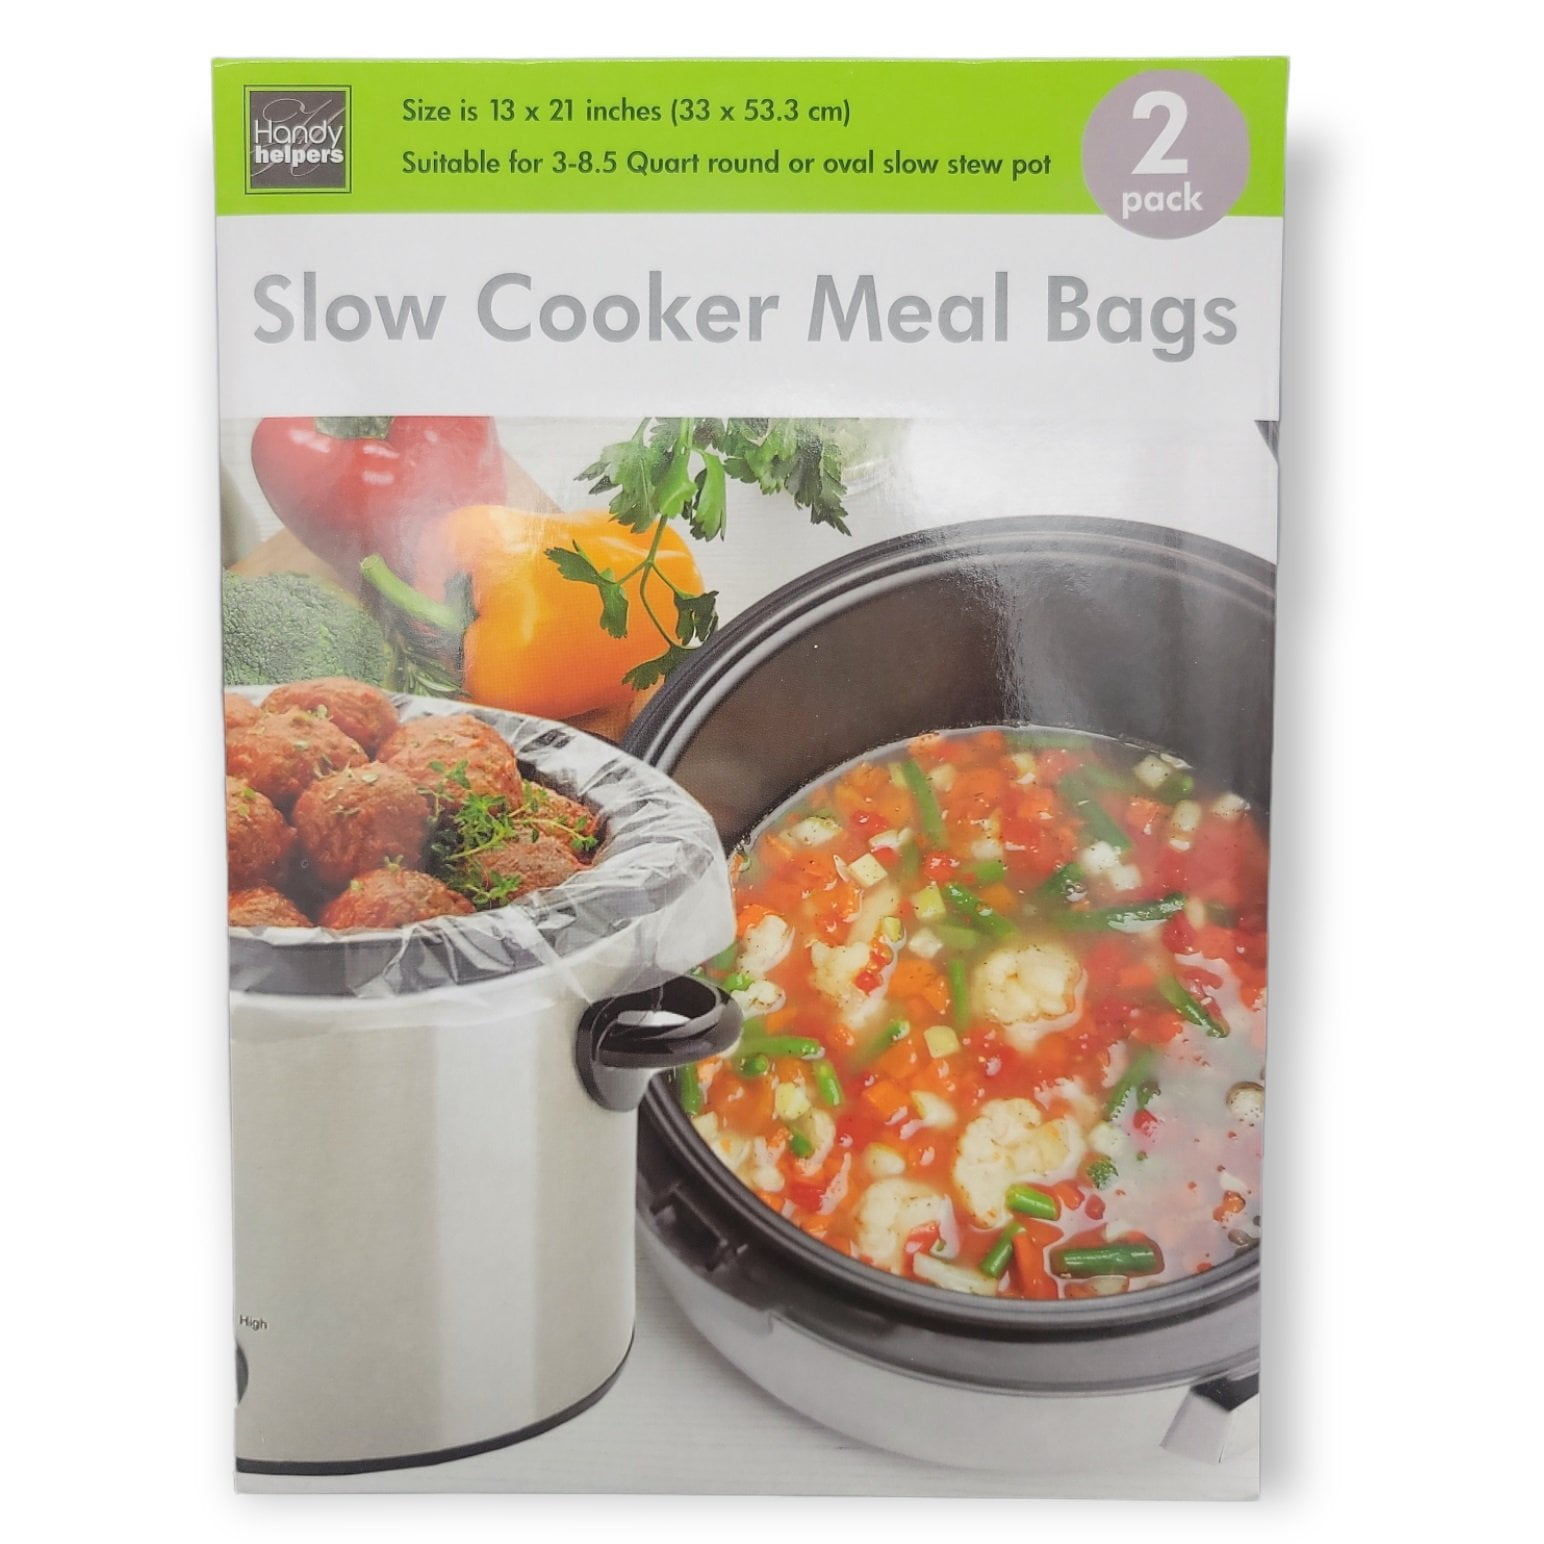 Reynolds Slow Cooker Liners 4-pack Fits 3 to 6.5 Quart Round &